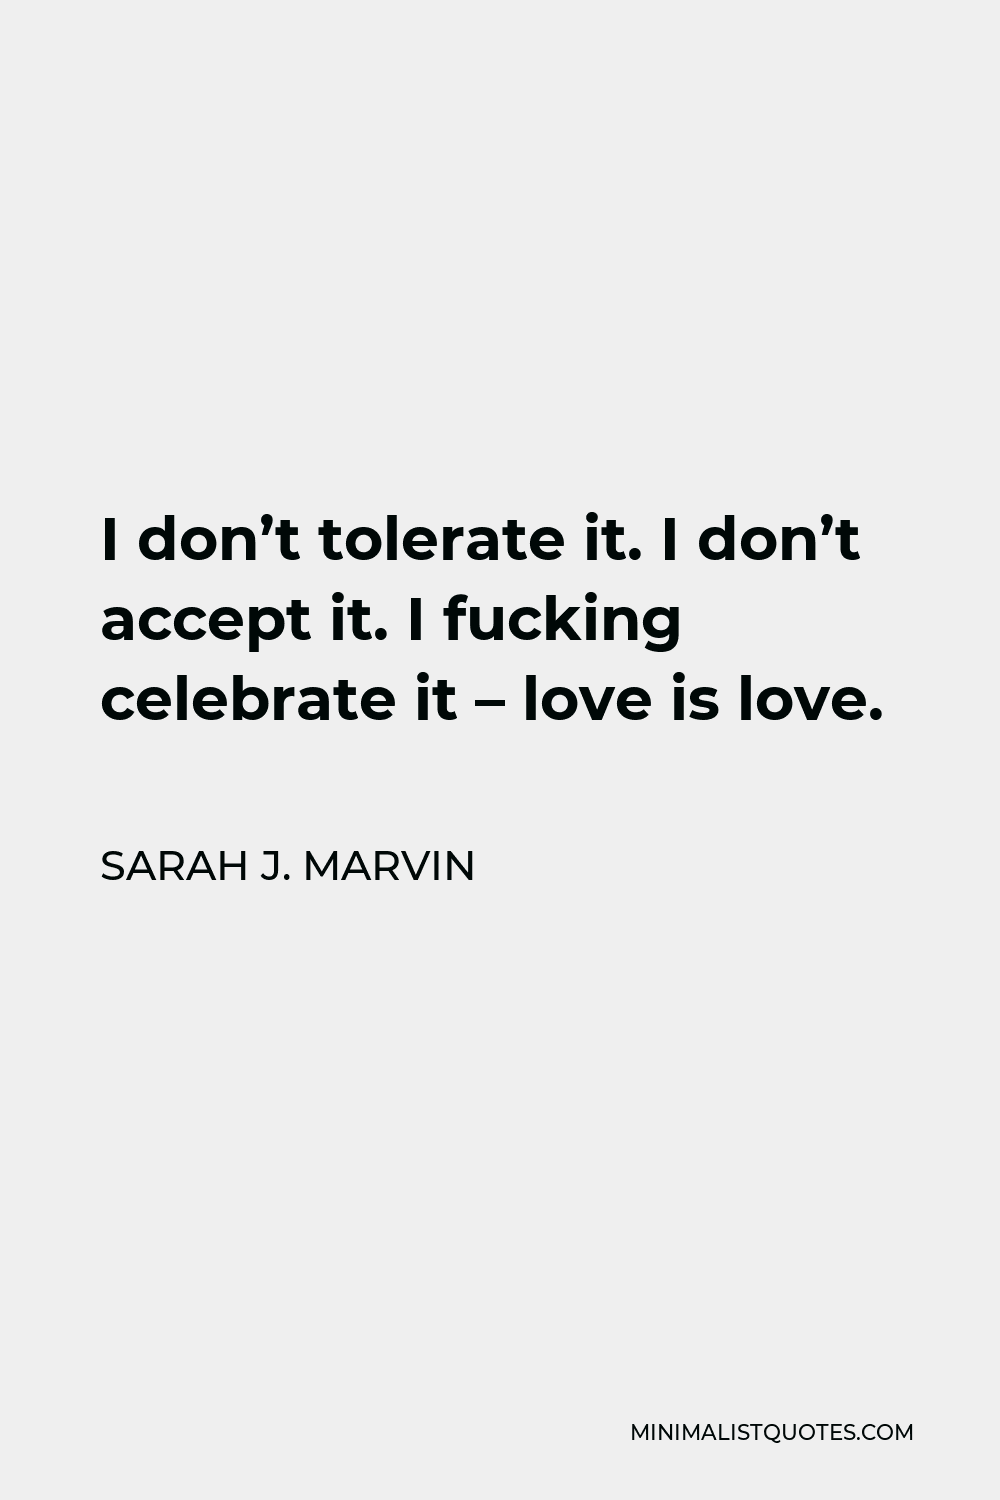 Sarah J. Marvin Quote - I don’t tolerate it. I don’t accept it. I fucking celebrate it – love is love.